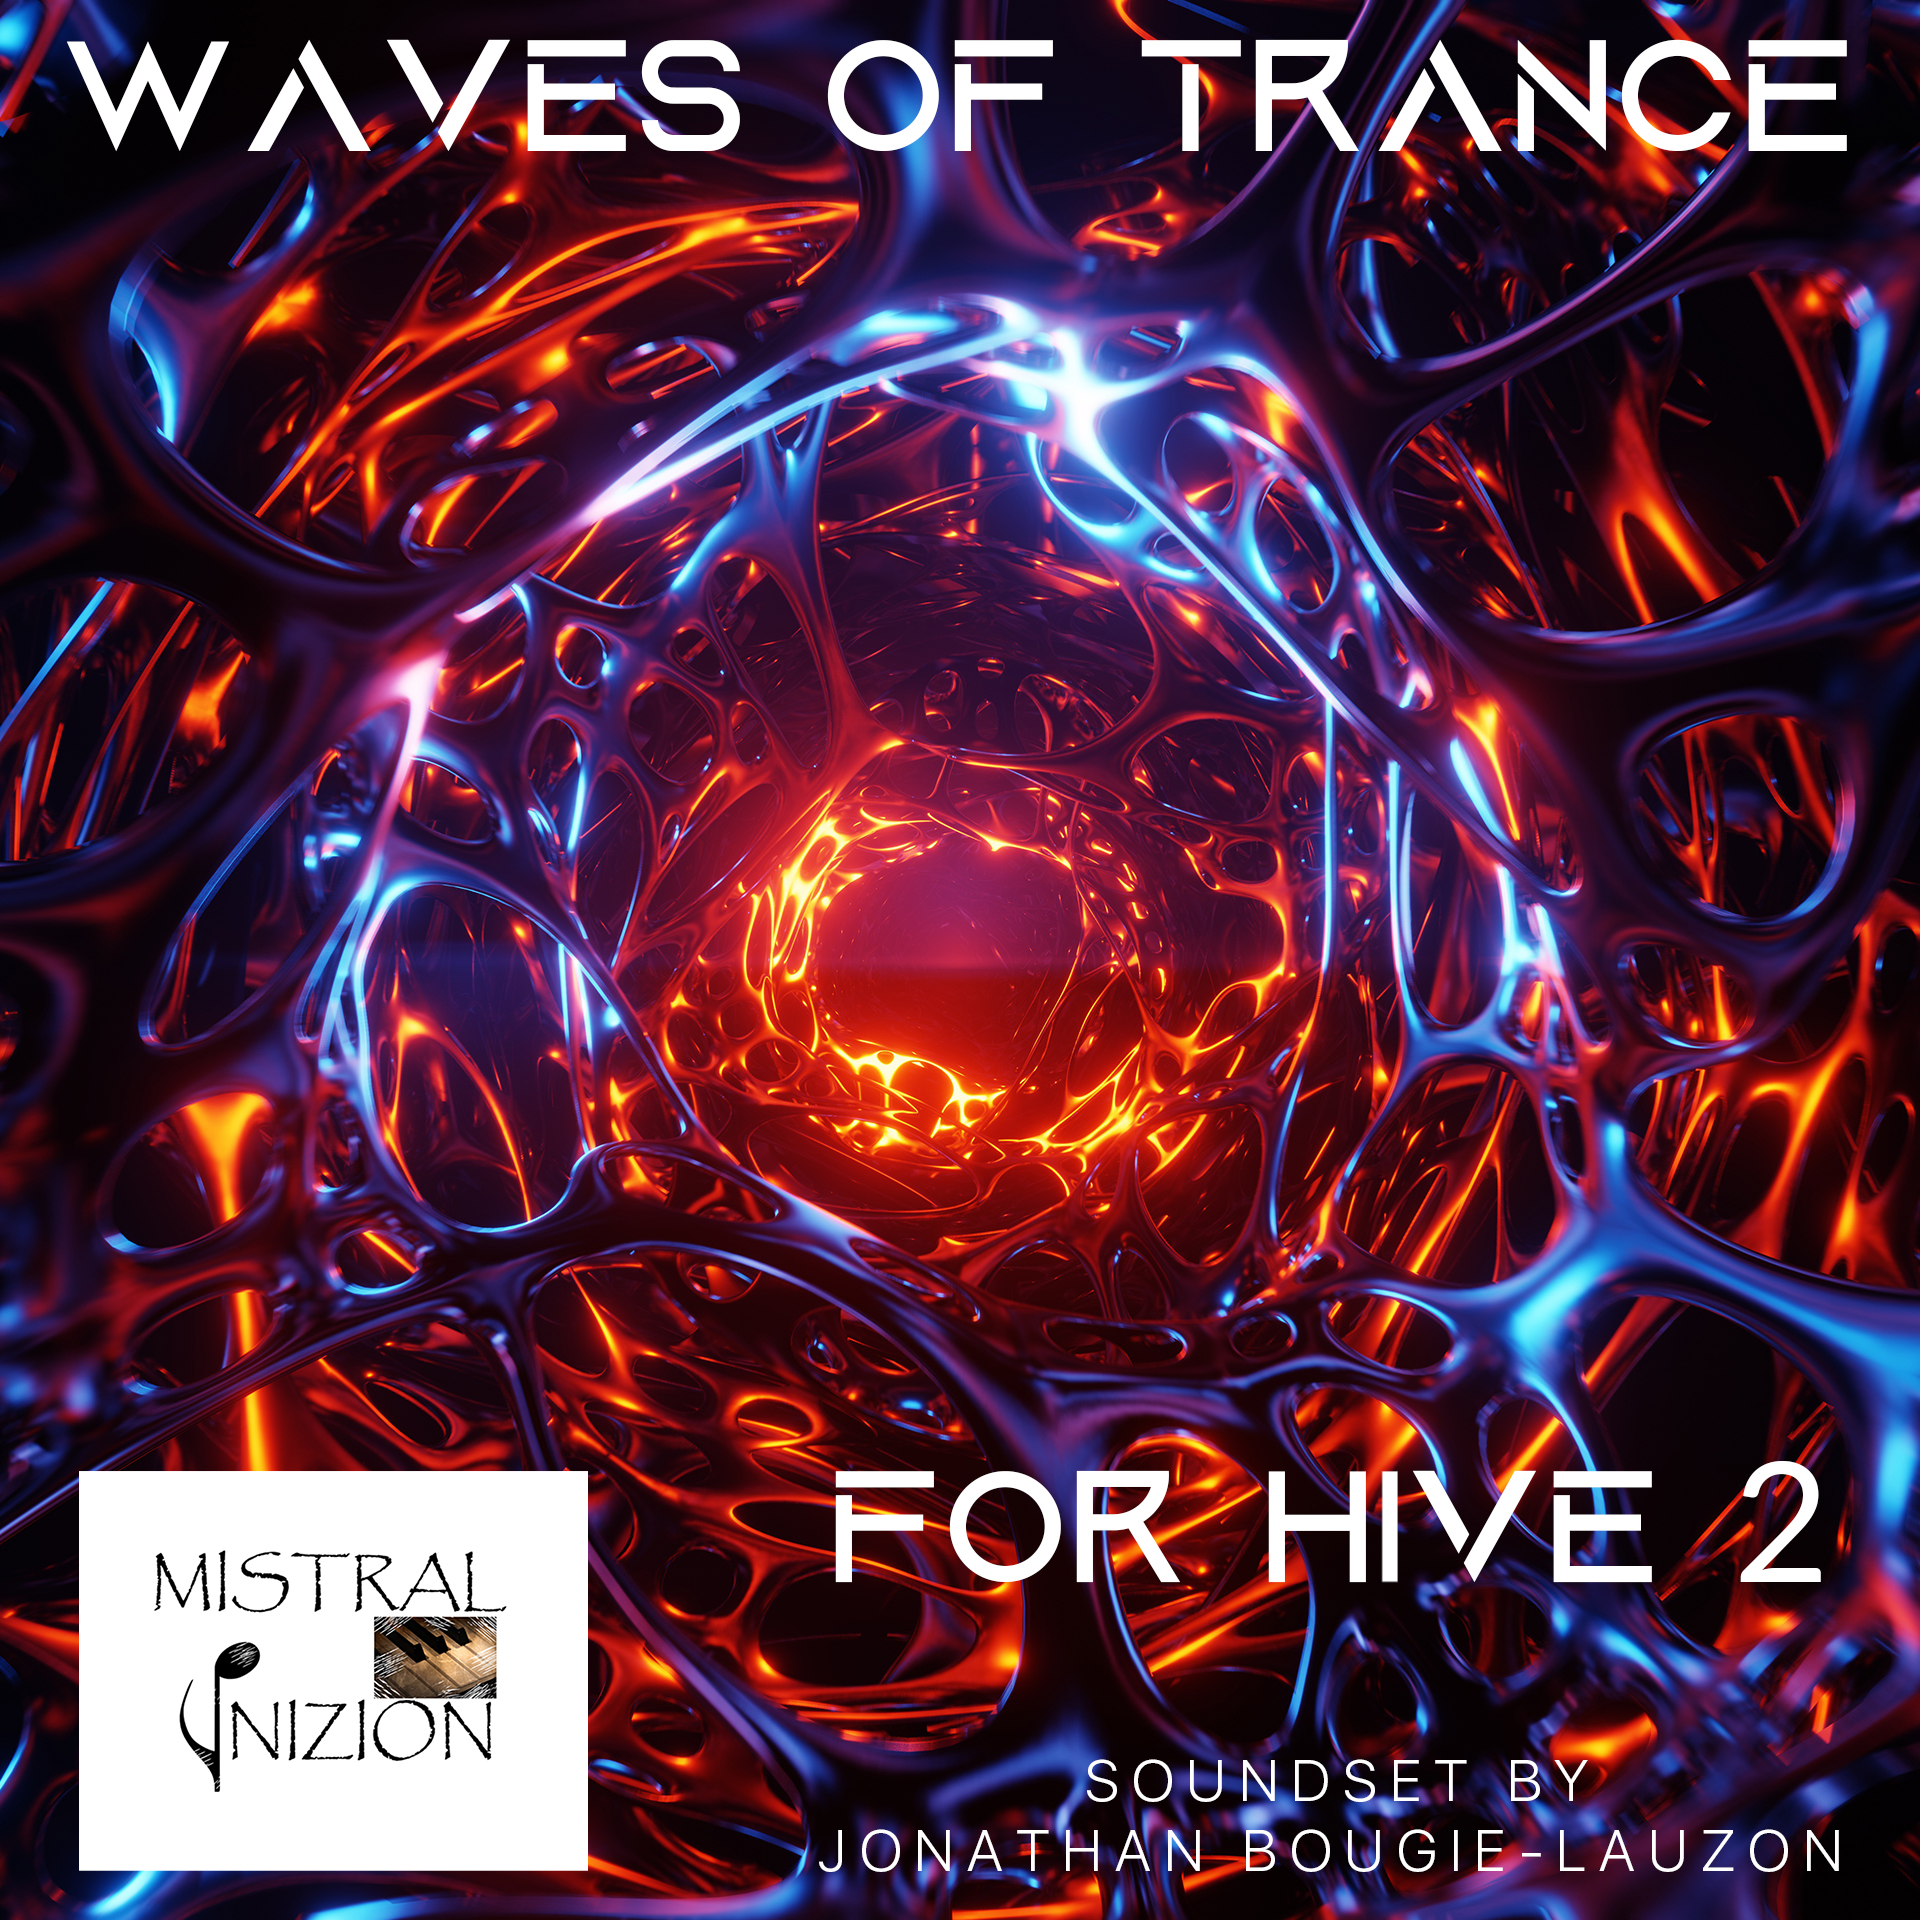 WAVES-OF-TRANCE-for-Hive-2.jpg